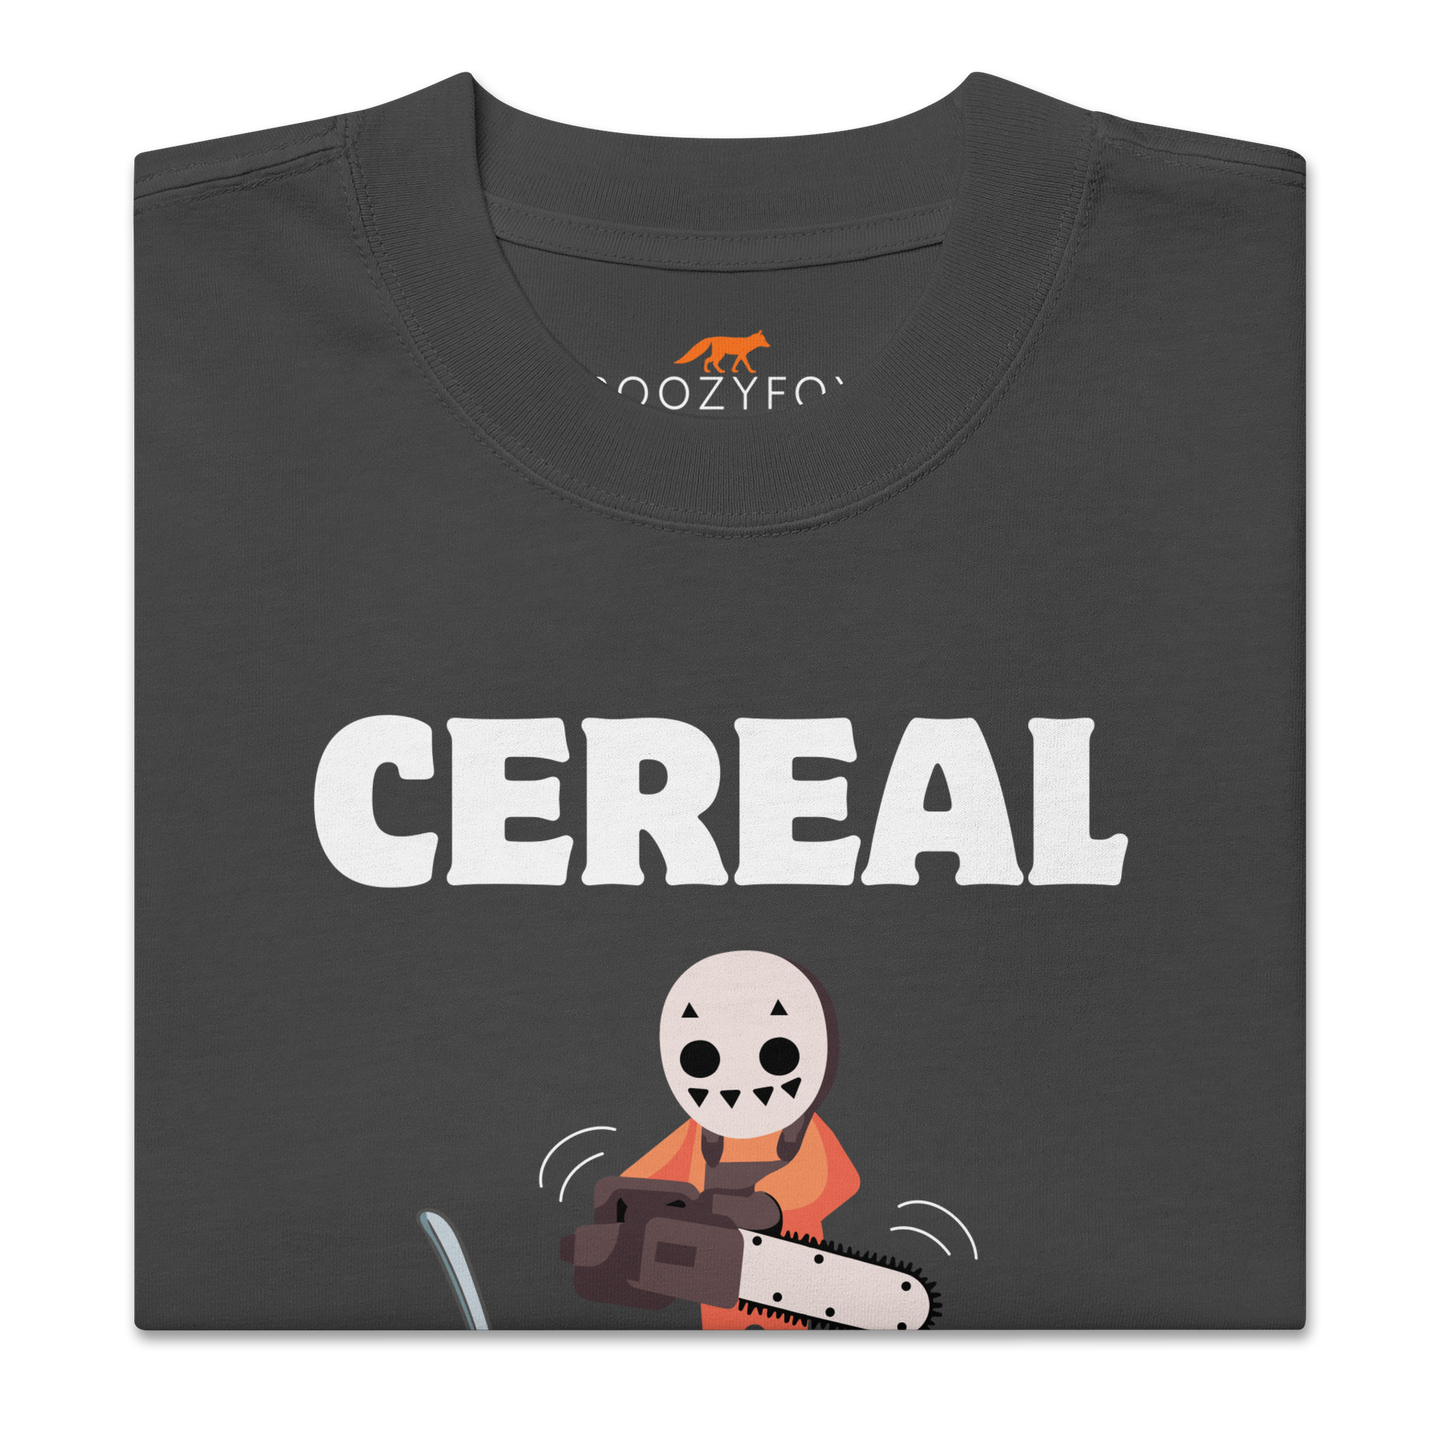 Front details of a Faded Black Cereal Killer Oversized T-Shirt featuring a Cereal Killer graphic on the chest - Funny Graphic Oversized Tees - Boozy Fox